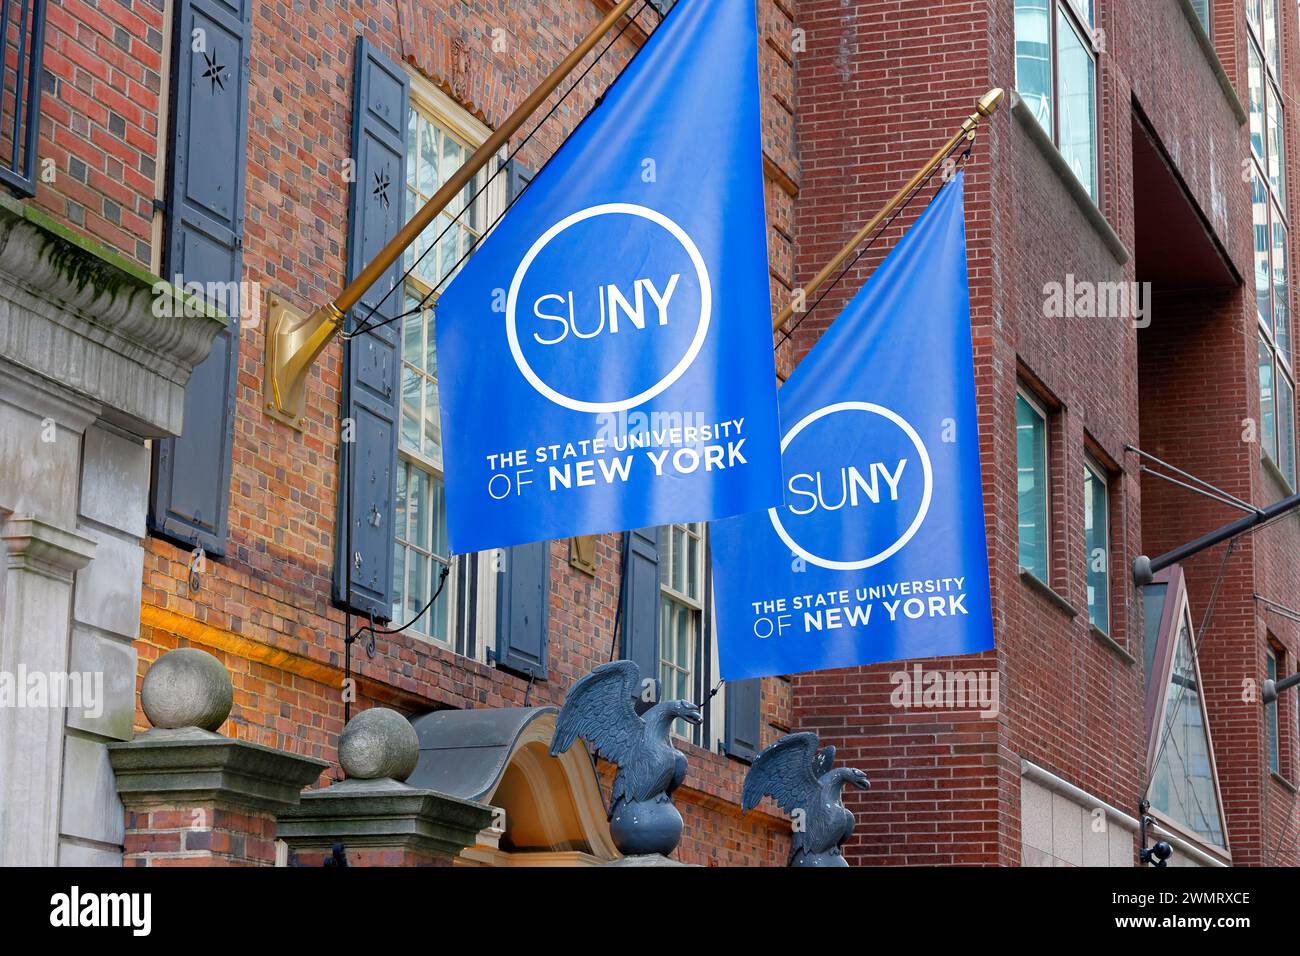 SUNY State University of New York flags adorning the exterior of the SUNY Welcome Center, 116 E 55th St, New York City. Stock Photo